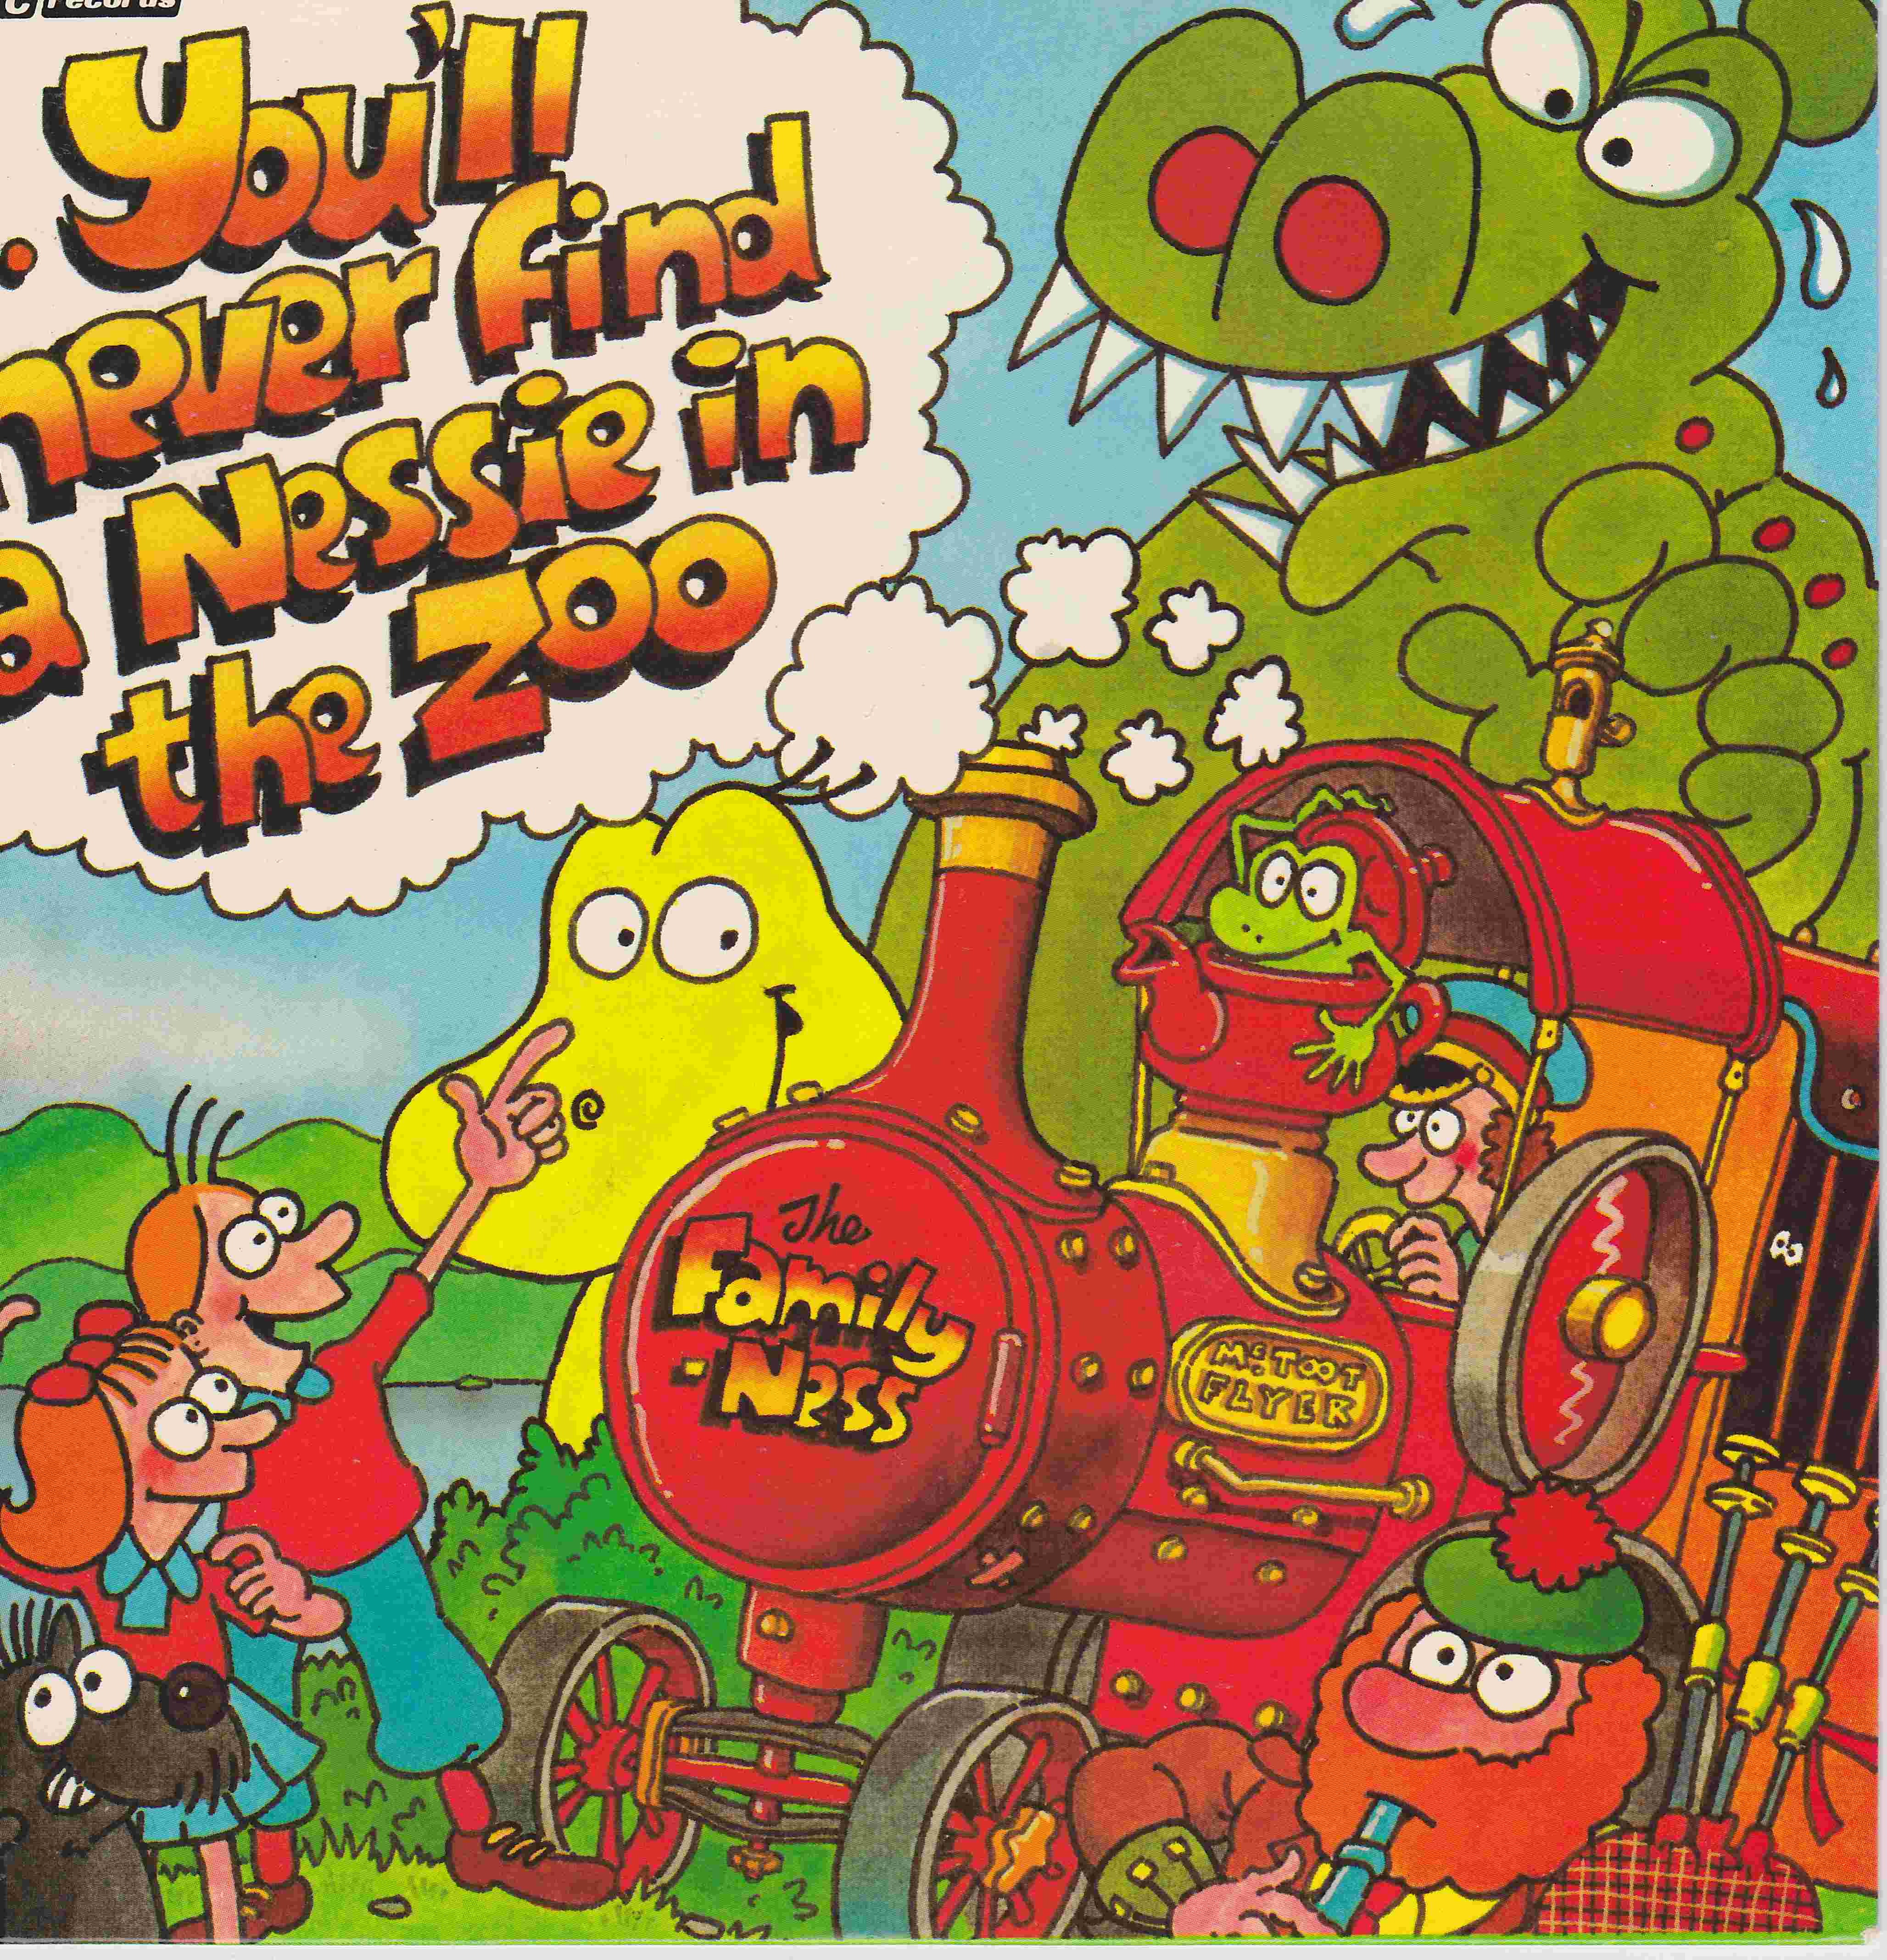 Picture of RESL 155 You'll never find a Nessie (The family ness) by artist Roger Greenaway / Gavin Greenaway / The Family Ness from the BBC records and Tapes library